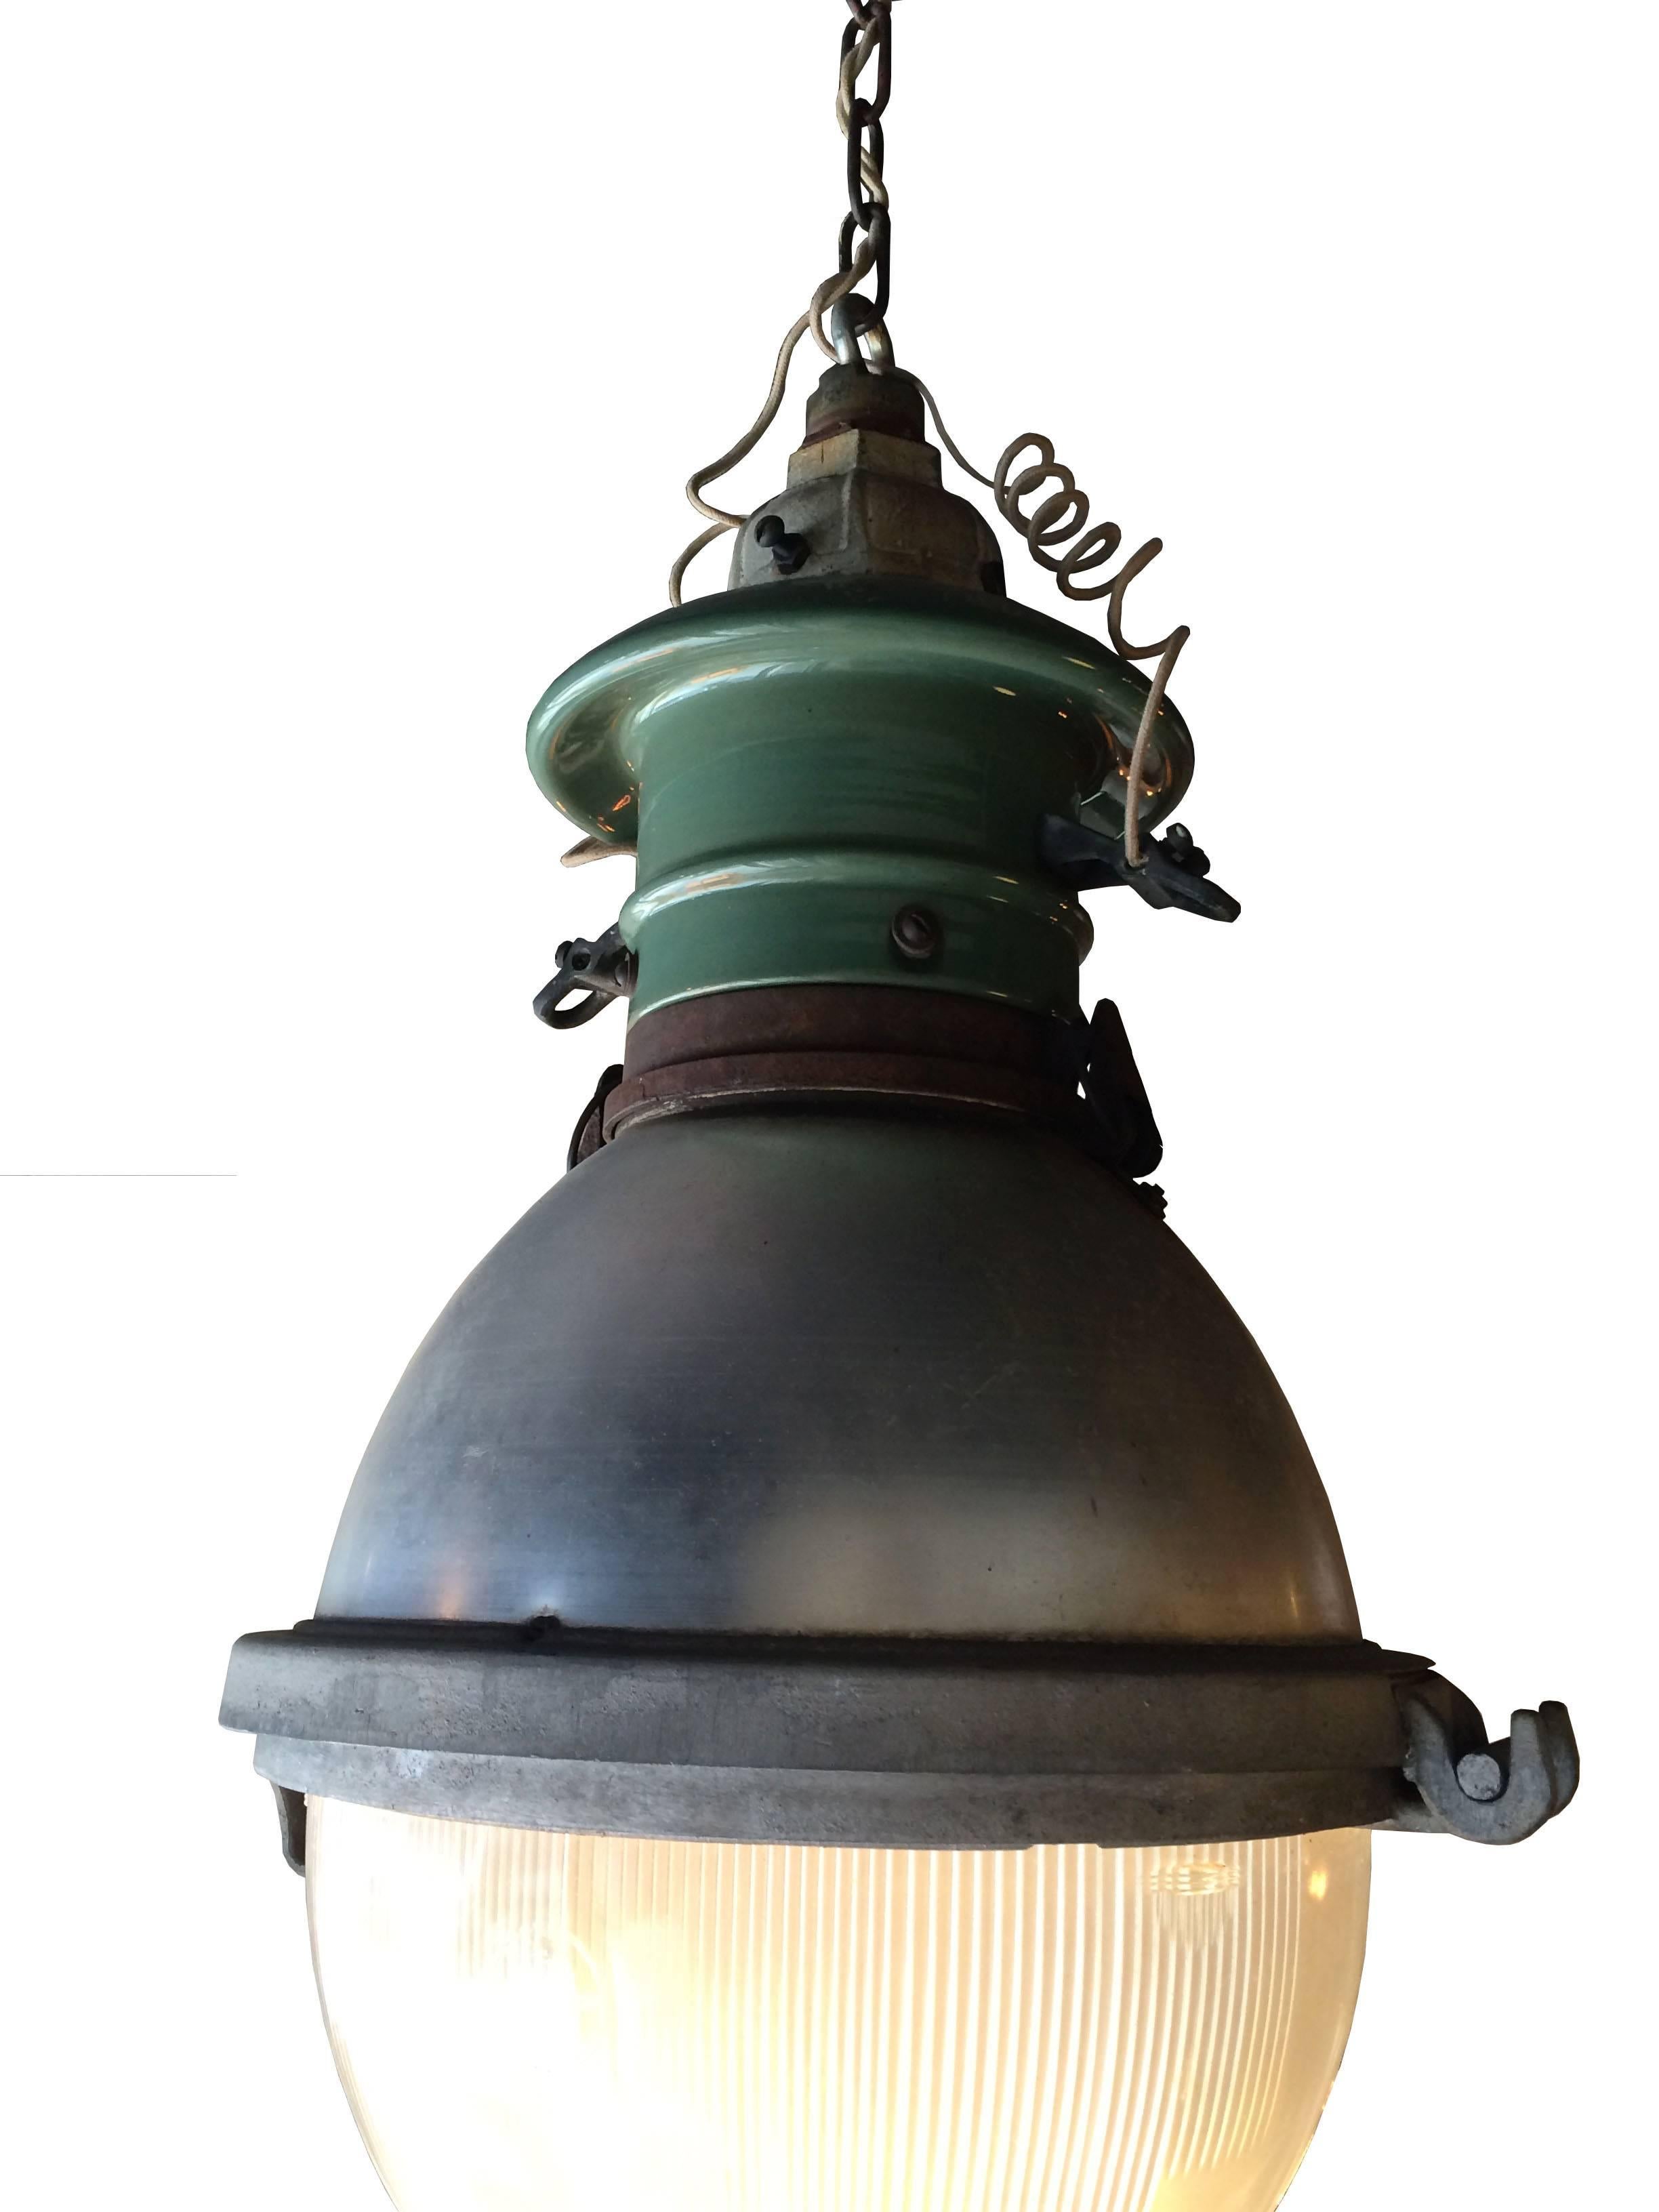 Impressive and rare, Industrial, street light pendant with cast iron and green porcelain fitter, spun aluminum dome casing and Holophane glass shade. Glass shade has Holophane logo in raised lettering with 